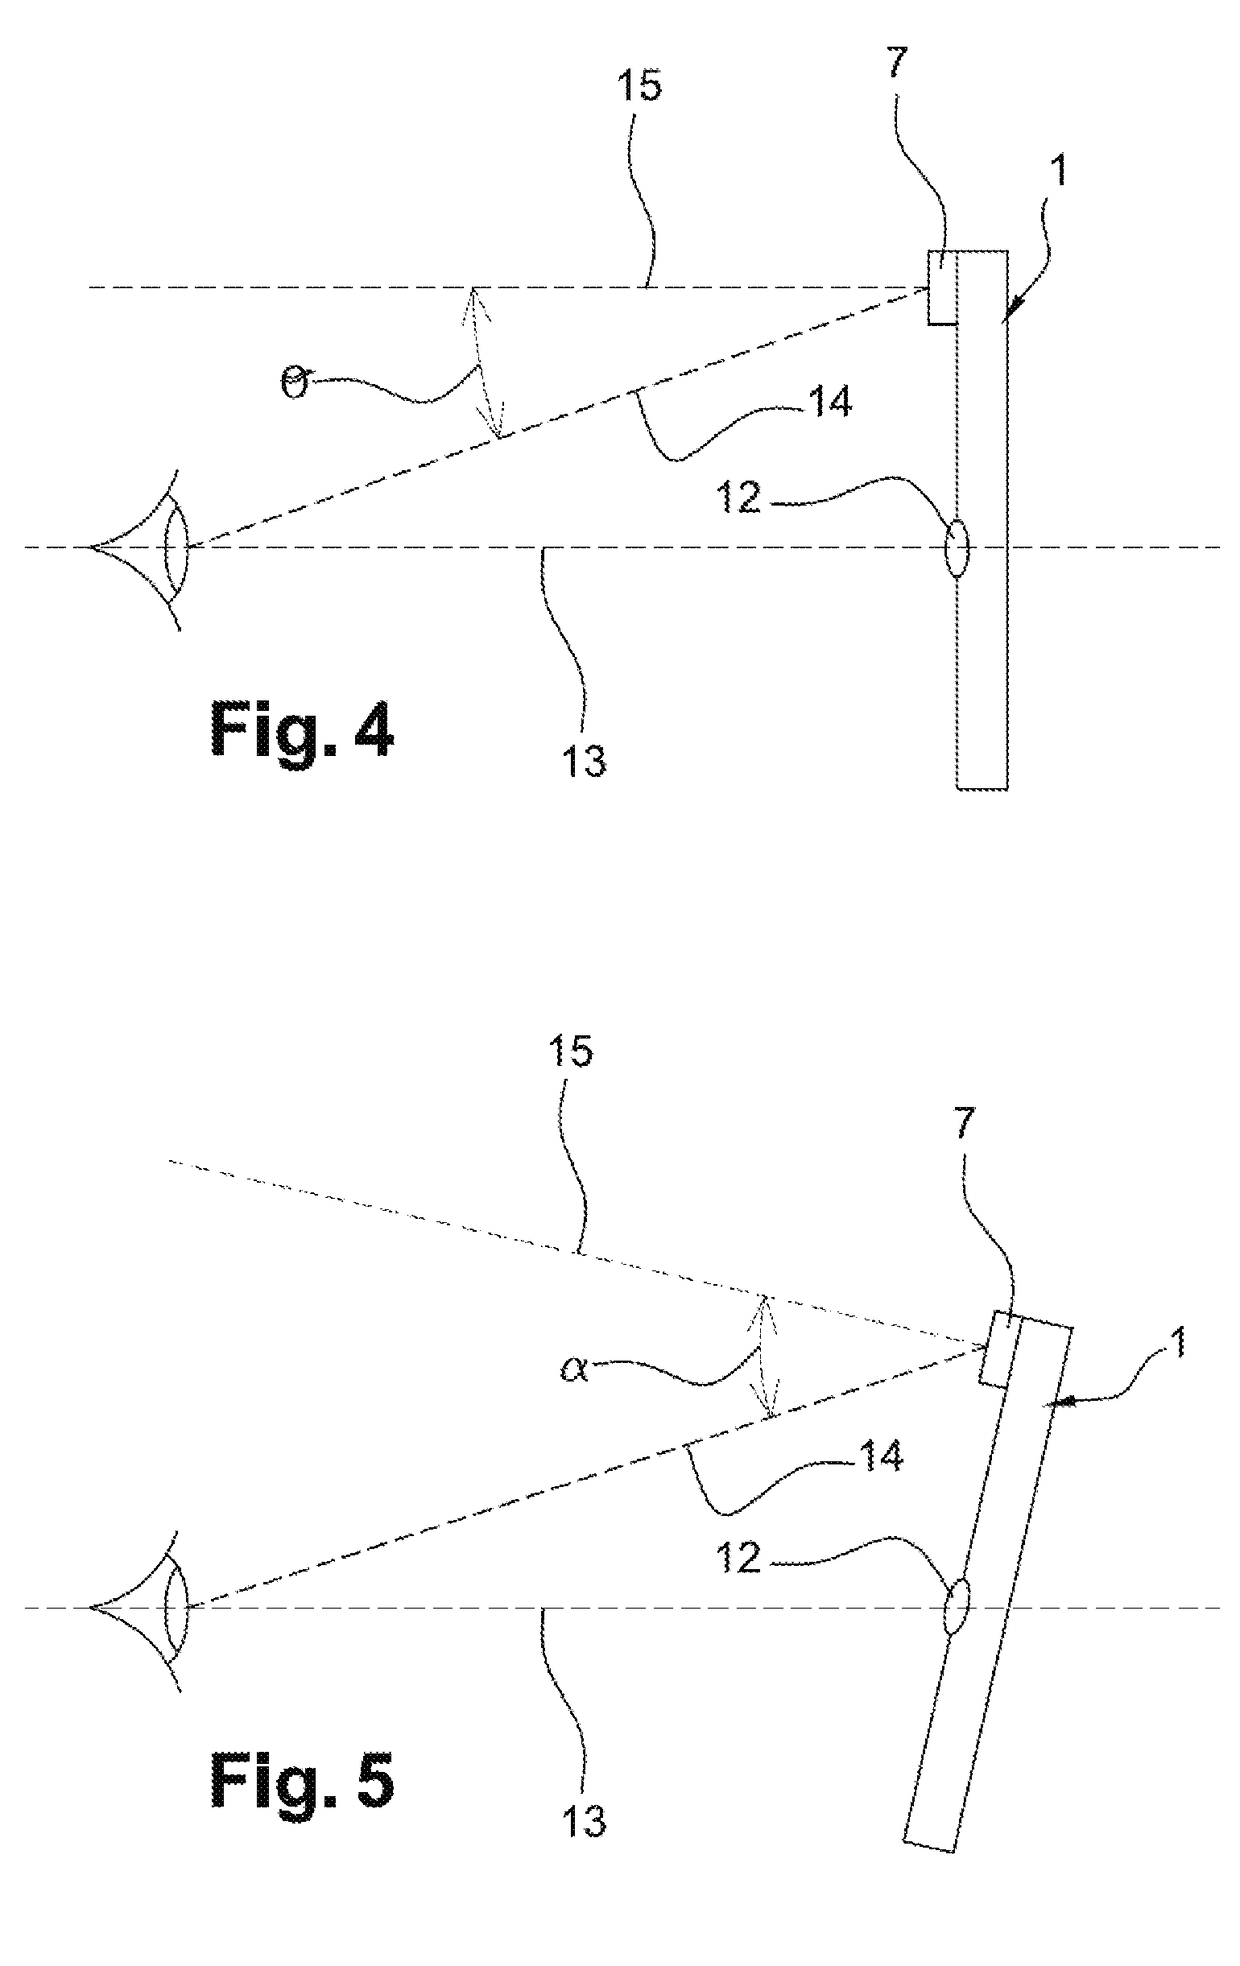 Method for measuring morpho-geometric parameters of a spectacle wearing individual